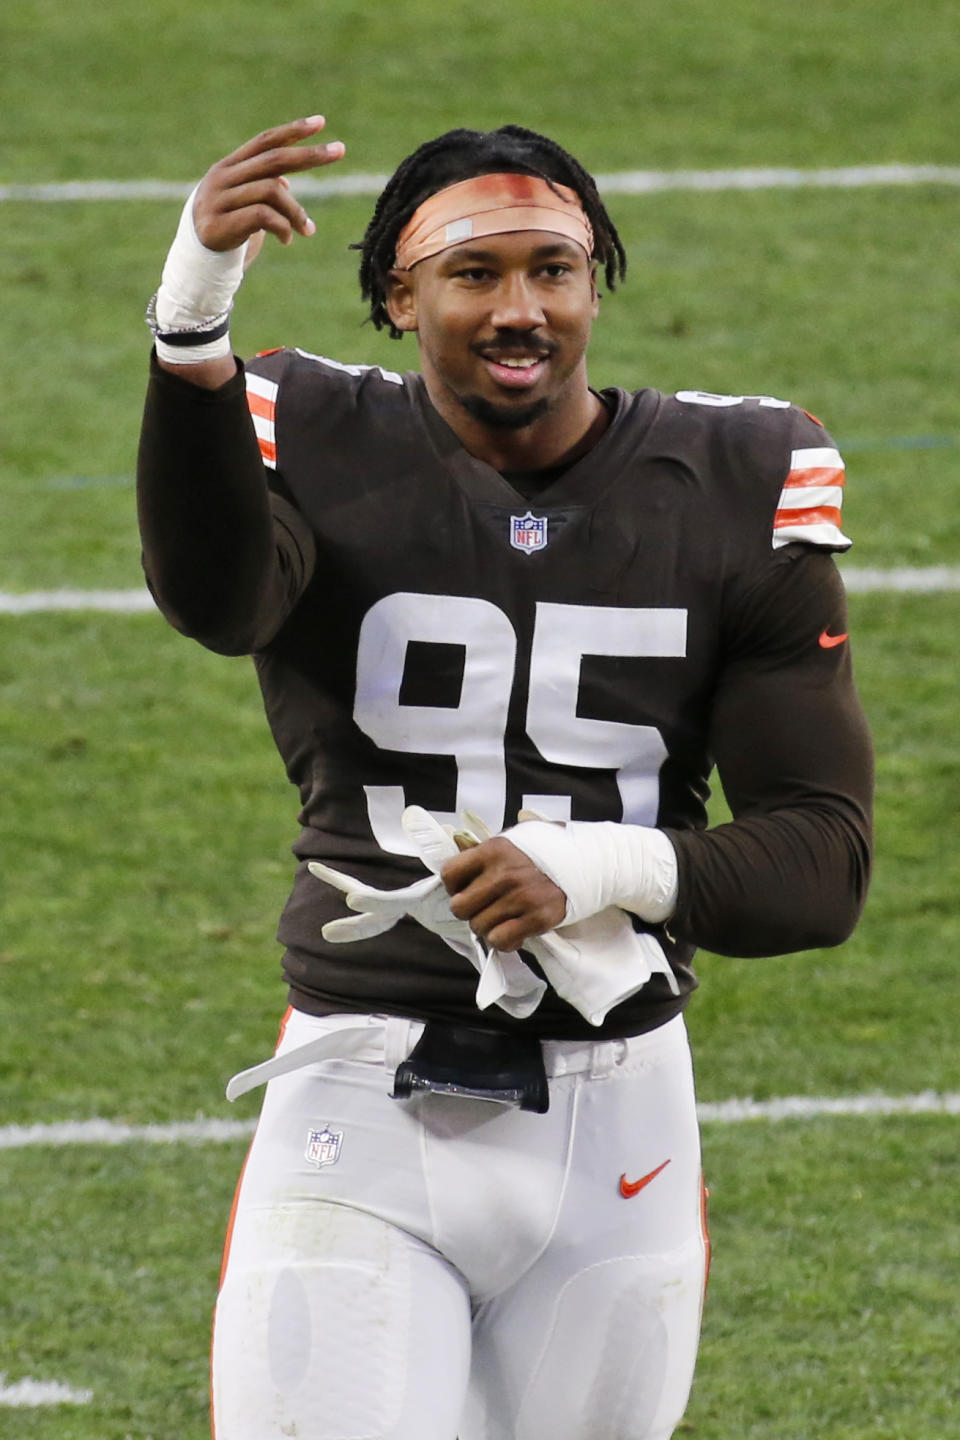 Cleveland Browns defensive end Myles Garrett celebrates after the Browns defeated the Houston Texans in an NFL football game, Sunday, Nov. 15, 2020, in Cleveland. (AP Photo/Ron Schwane)